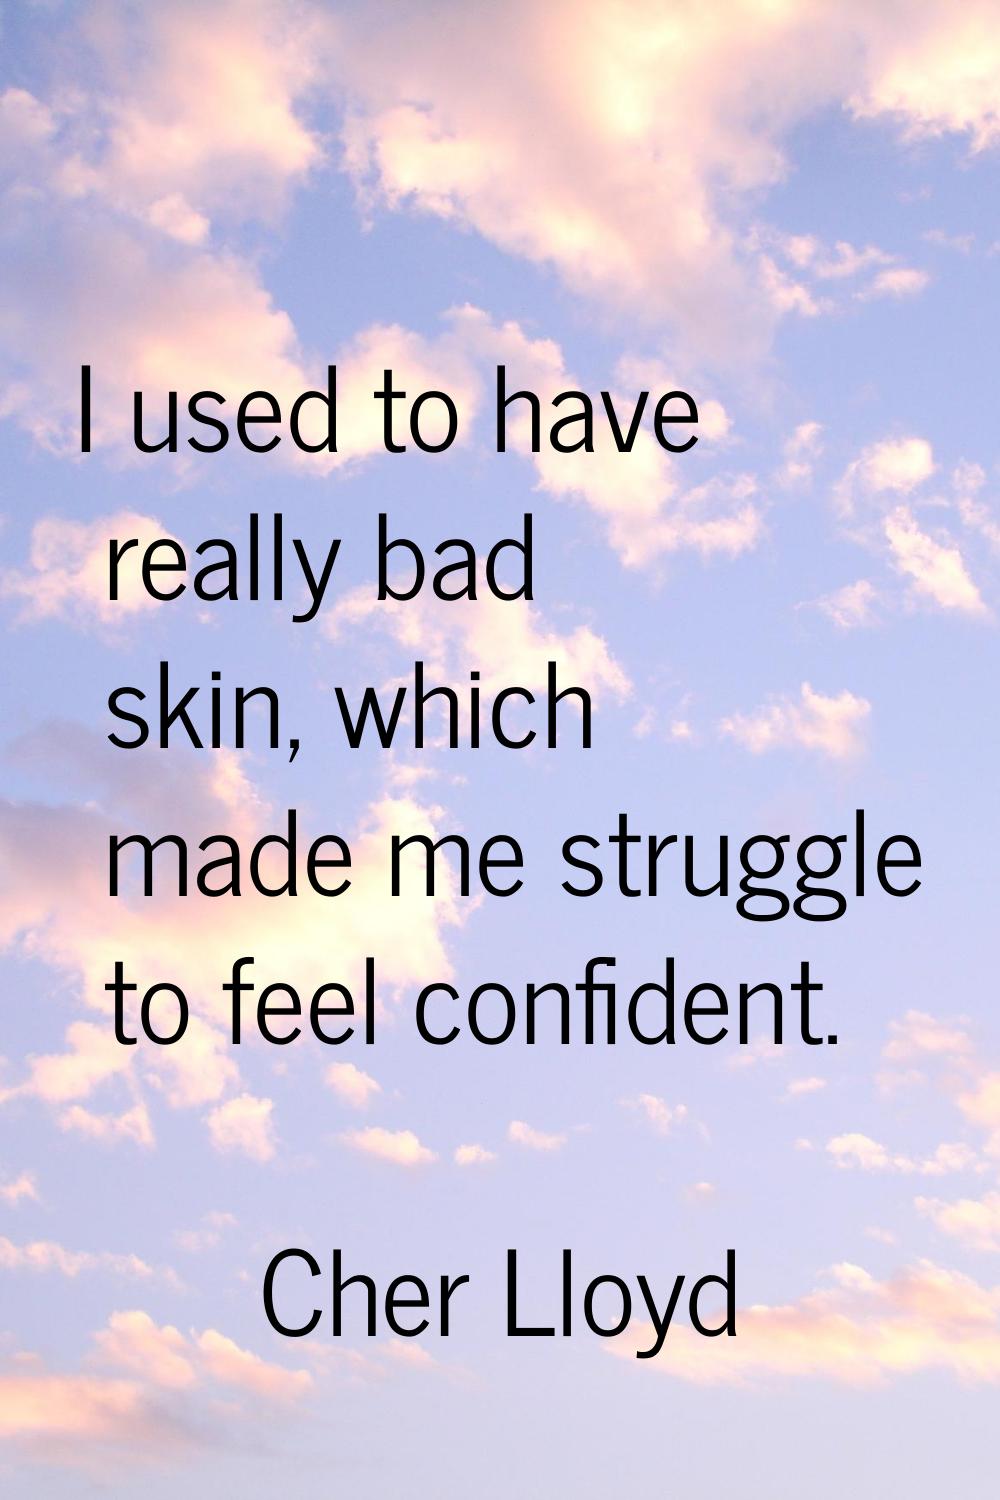 I used to have really bad skin, which made me struggle to feel confident.